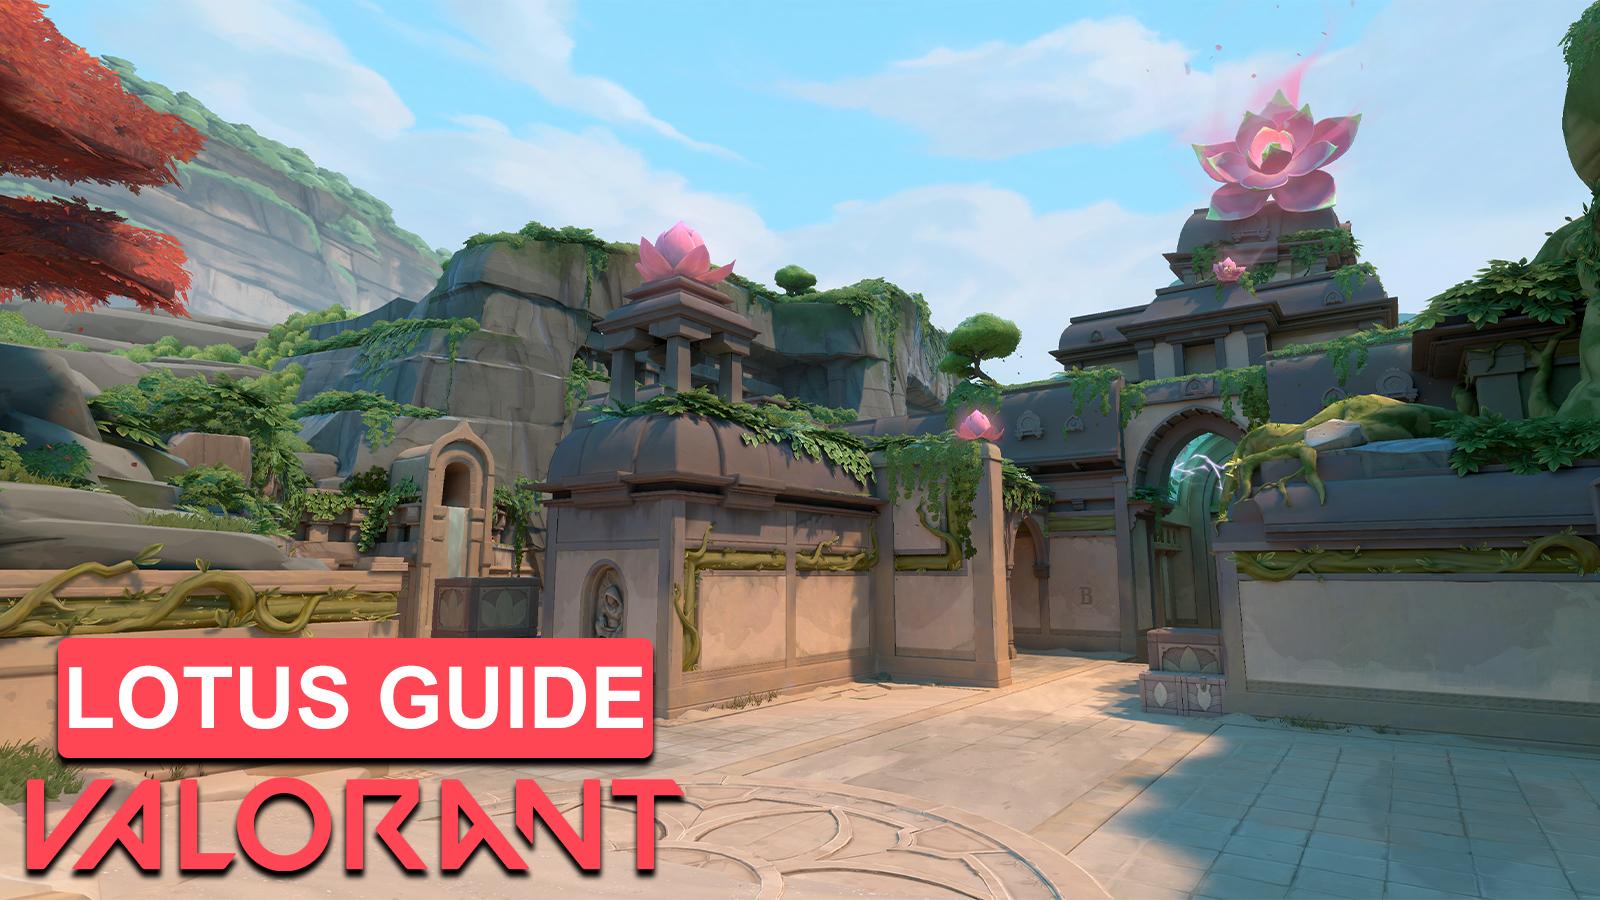 Valorant Haven Map Guide: Best strategies & spike sites